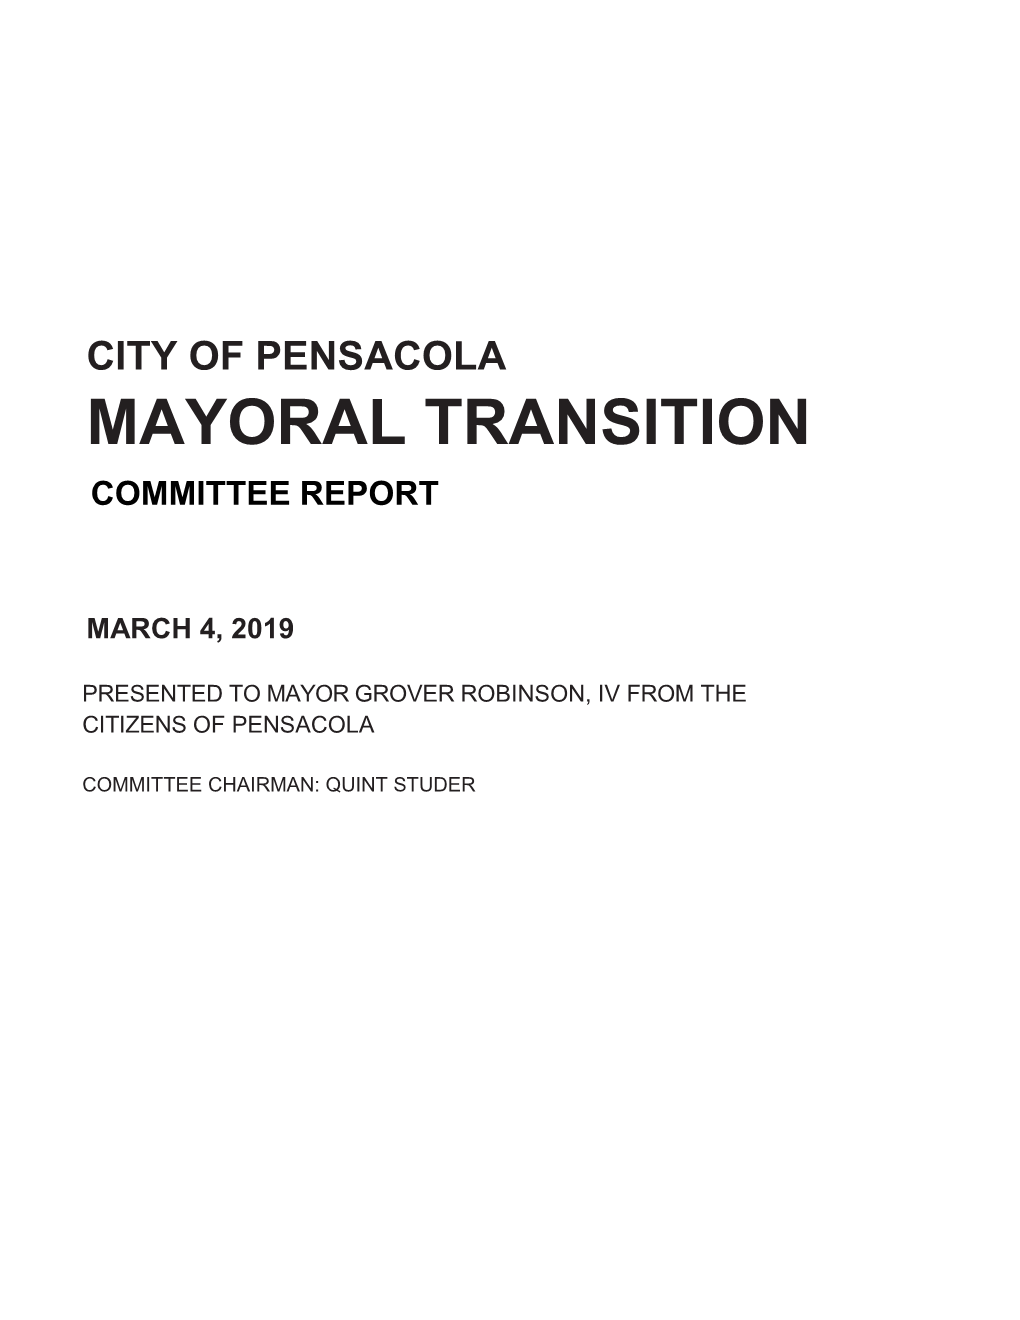 City of Pensacola Mayoral Transition Committee Report 2019